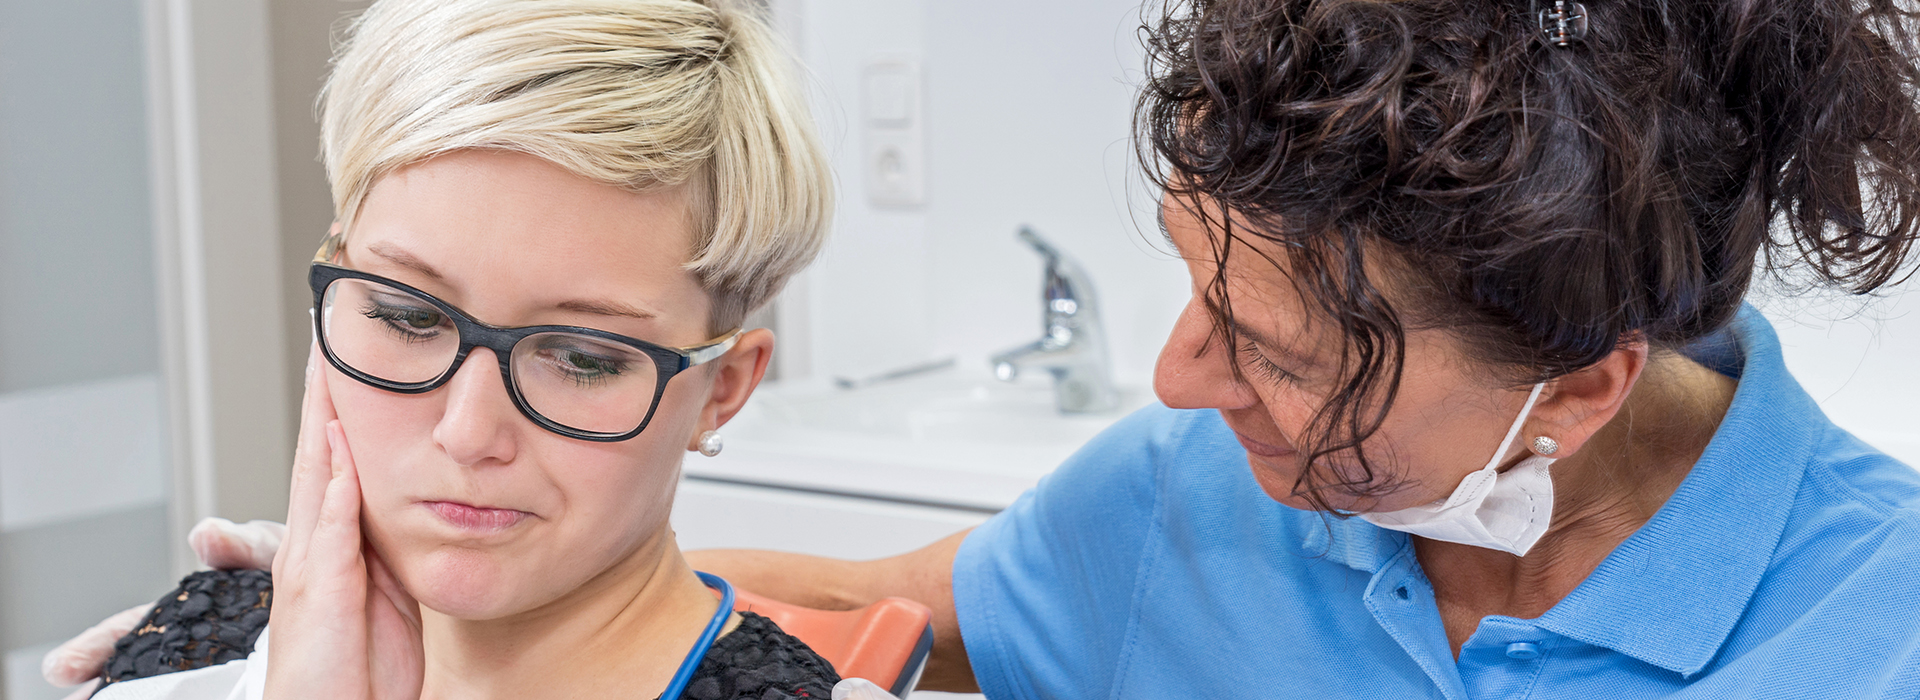 The image shows a woman receiving dental care from a professional in a clinical setting.